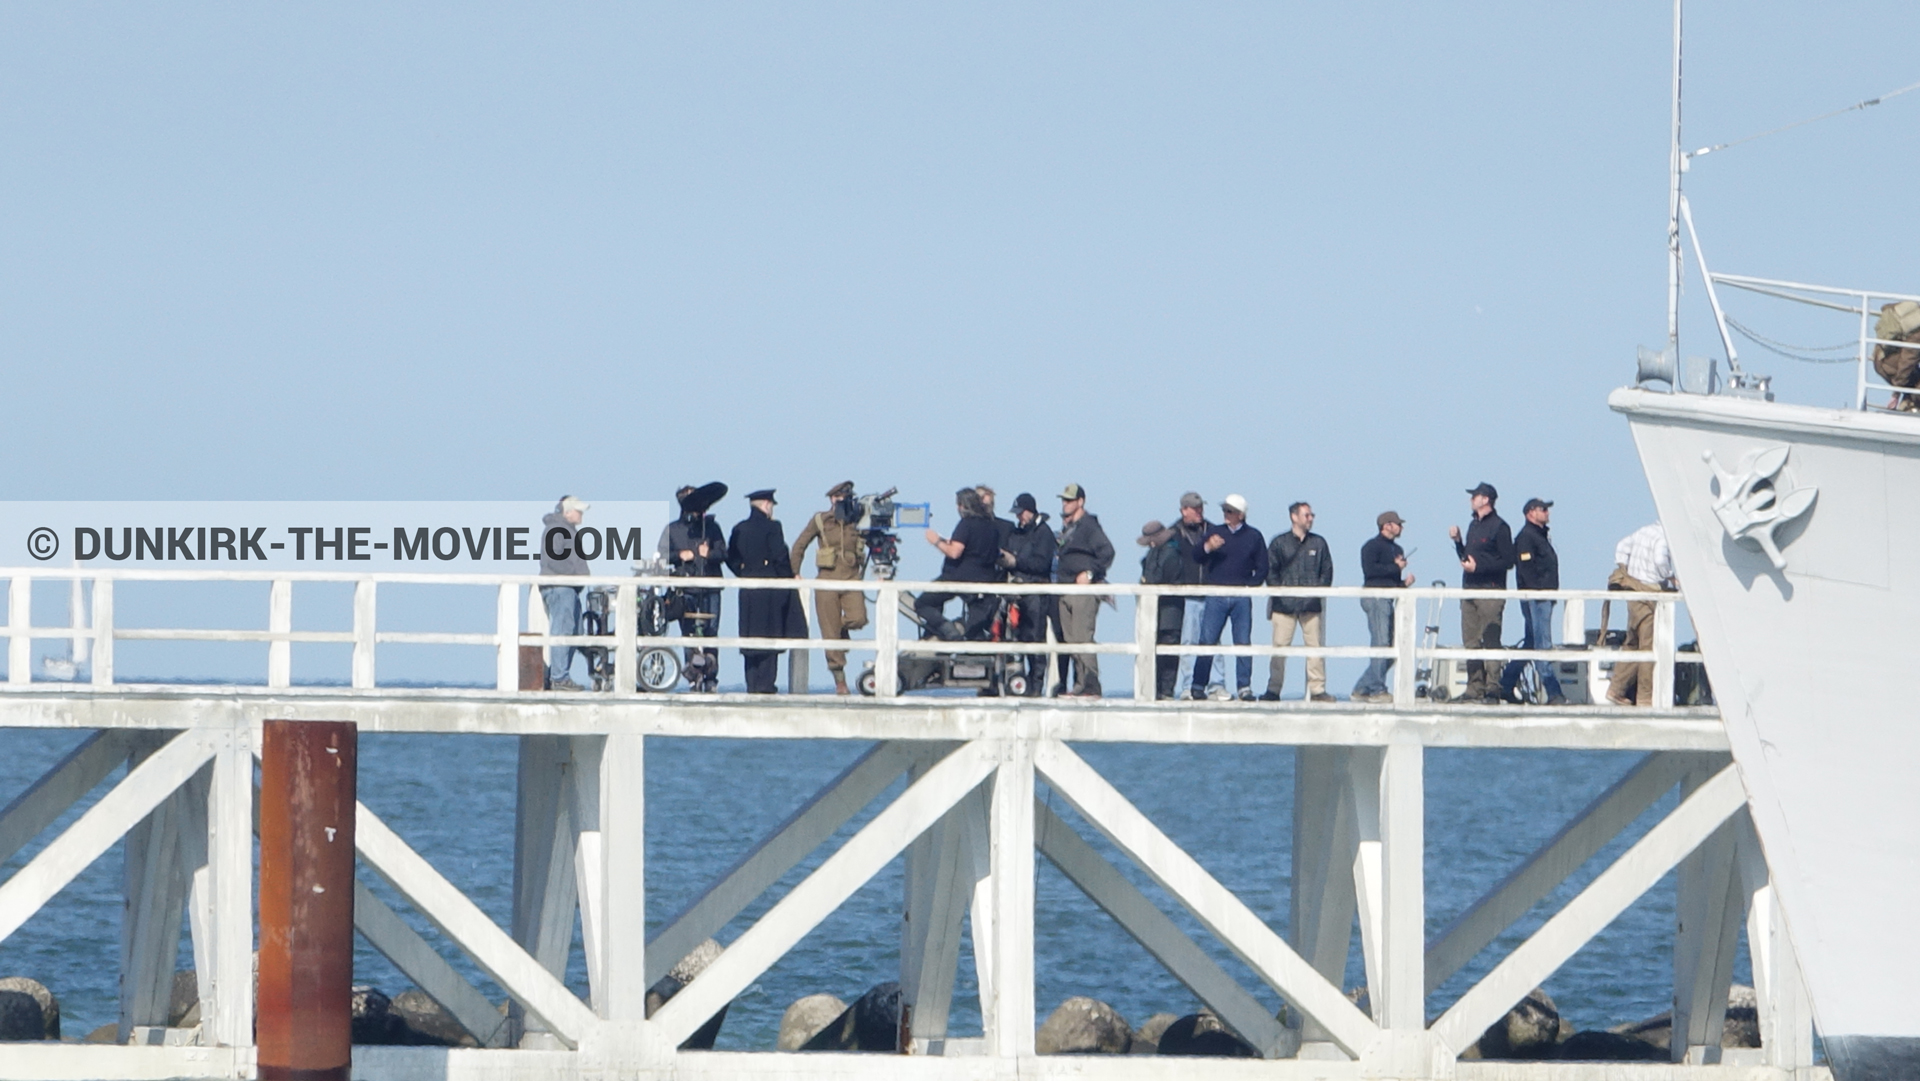 Picture with actor, IMAX camera, blue sky, supernumeraries, H32 - Hr.Ms. Sittard, Hoyte van Hoytema, EST pier, Kenneth Branagh,  from behind the scene of the Dunkirk movie by Nolan